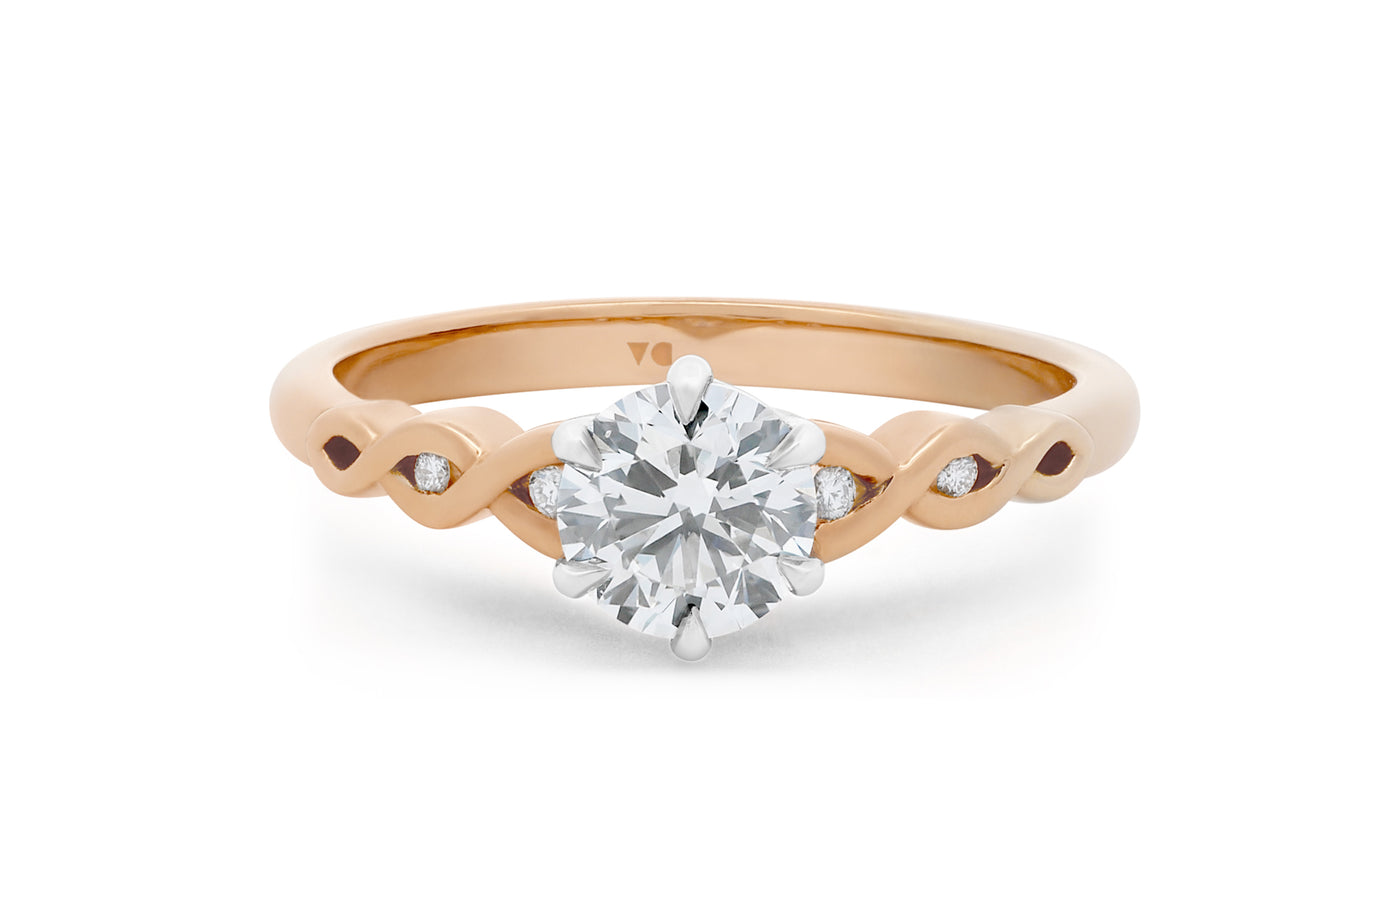 Pikorua: Brilliant Cut Diamond Solitaire Ring in 18ct Rose Gold, from The Narrative Collection